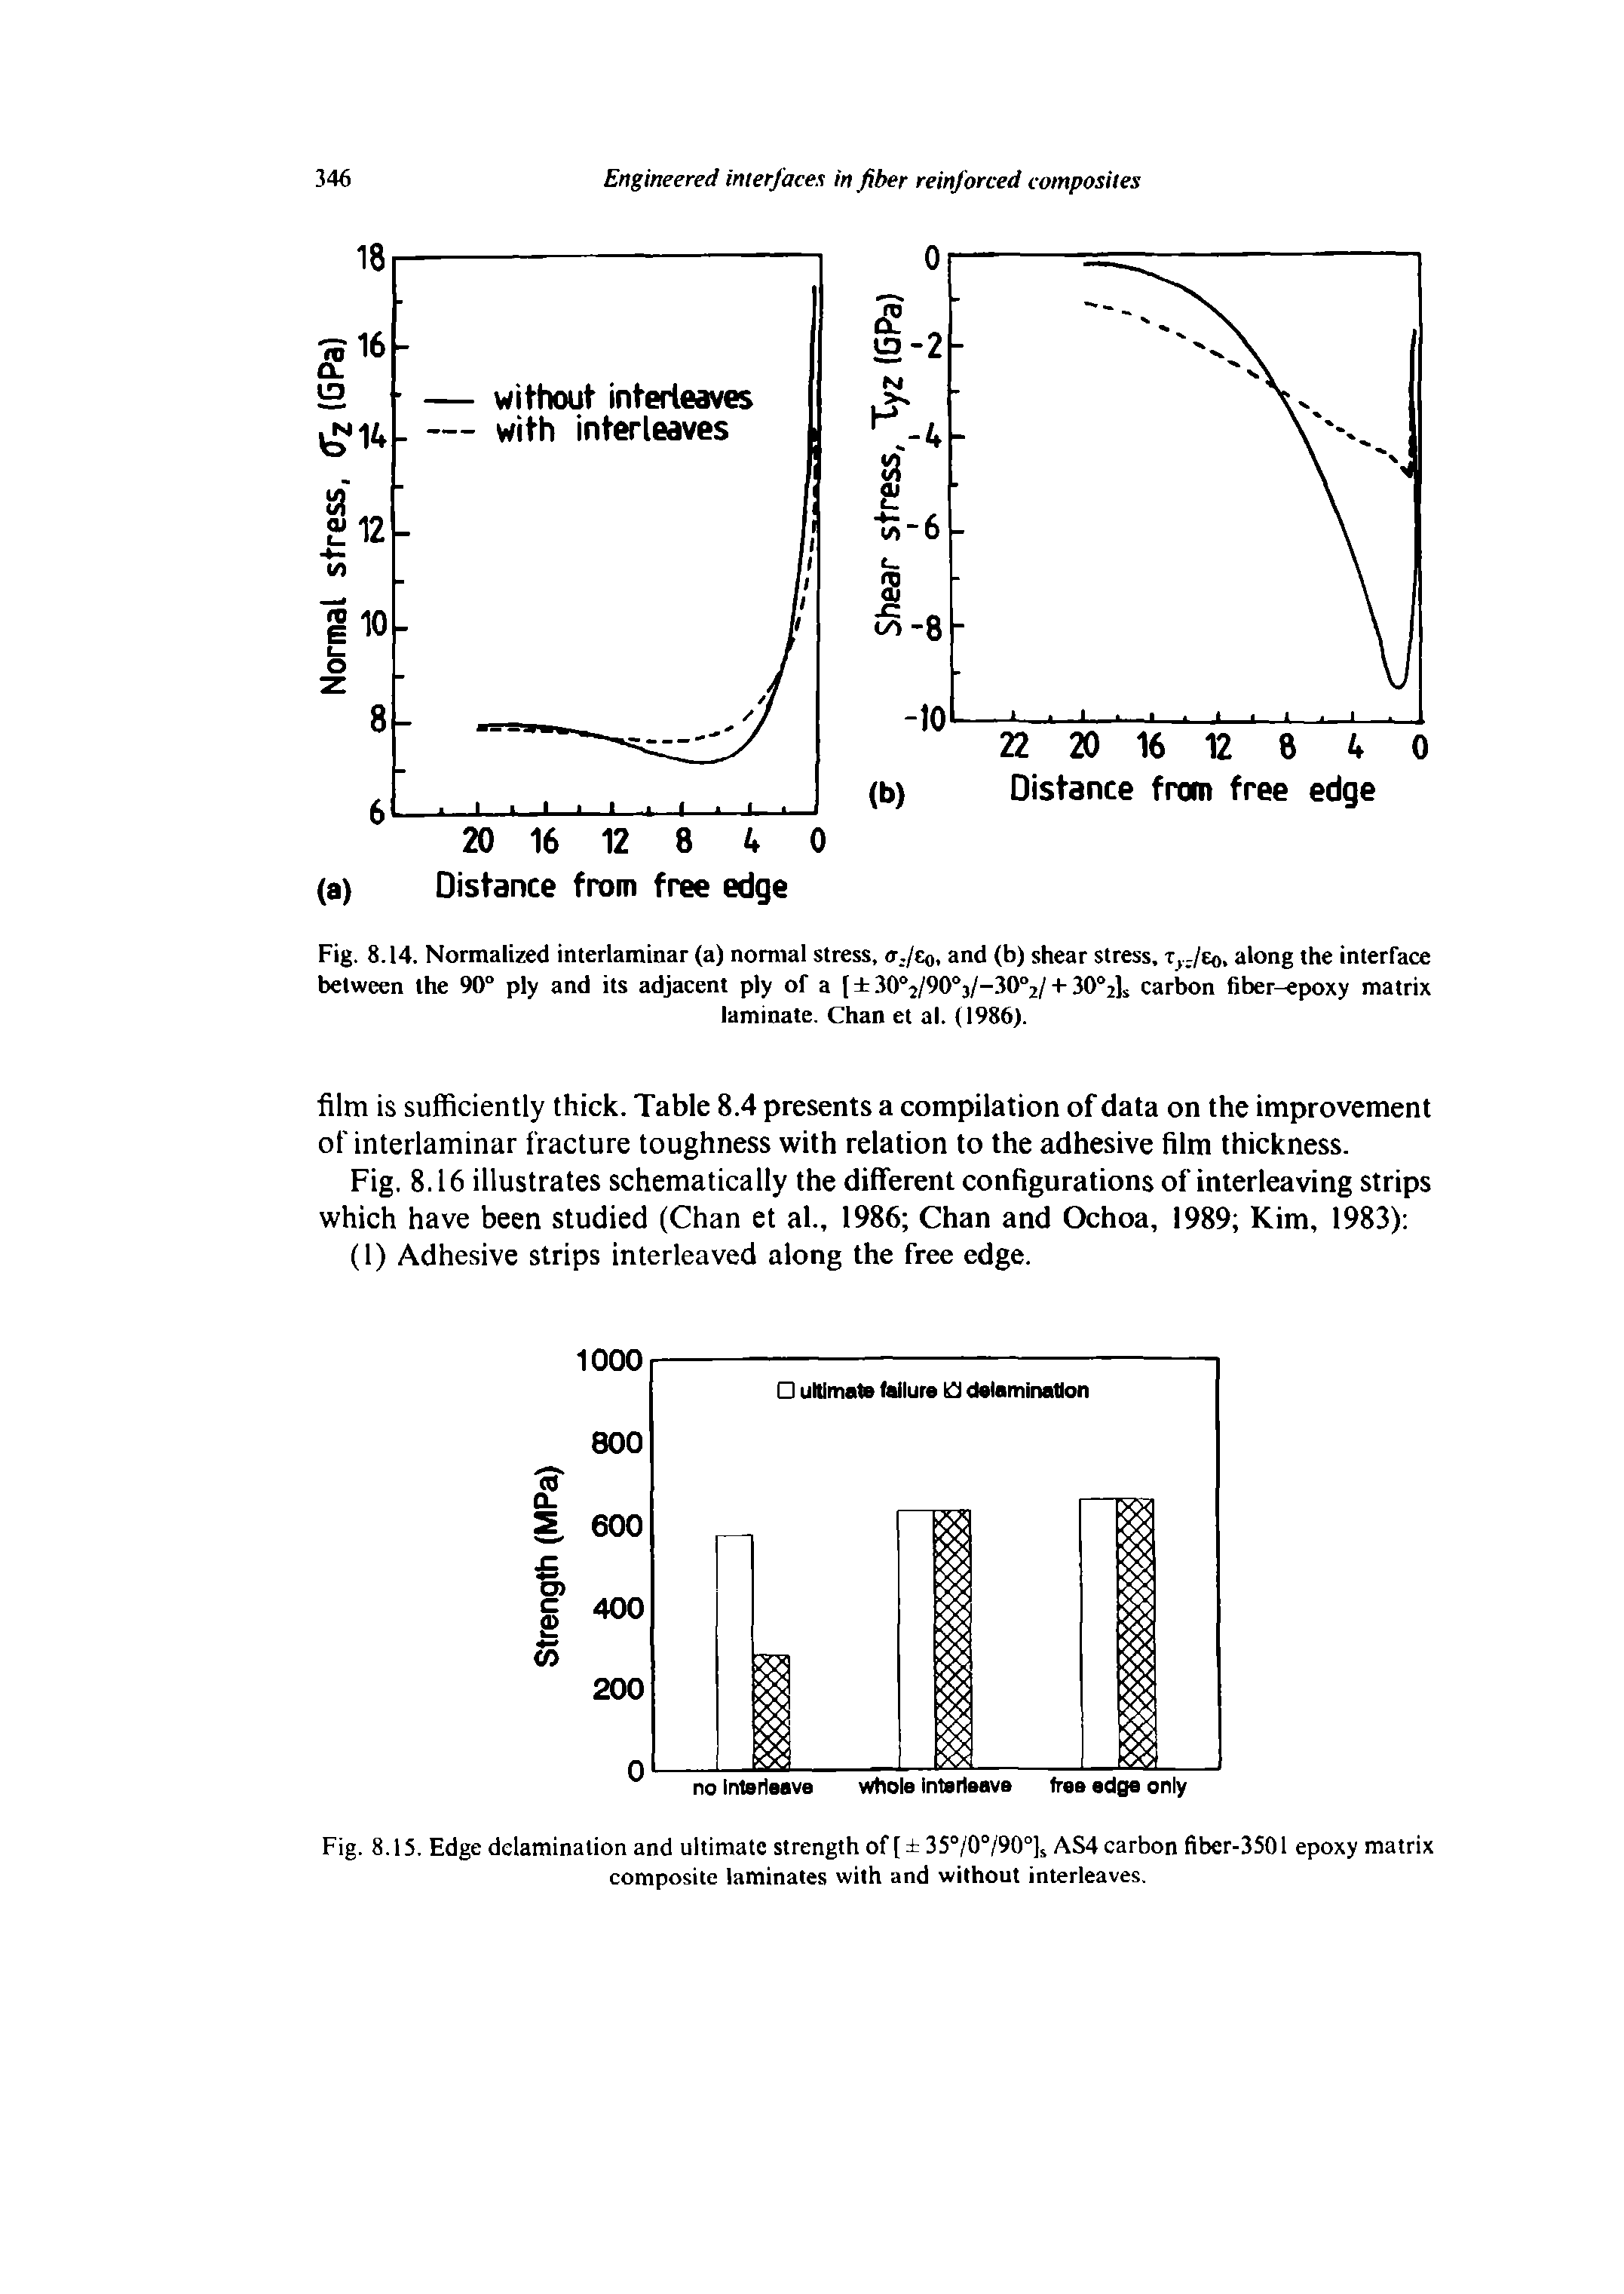 Fig. 8.15. Edge delaminalion and ultimate strength of [ 35°/0°/90°k AS4 carbon fiber-3501 epoxy matrix composite laminates with and without interleaves.